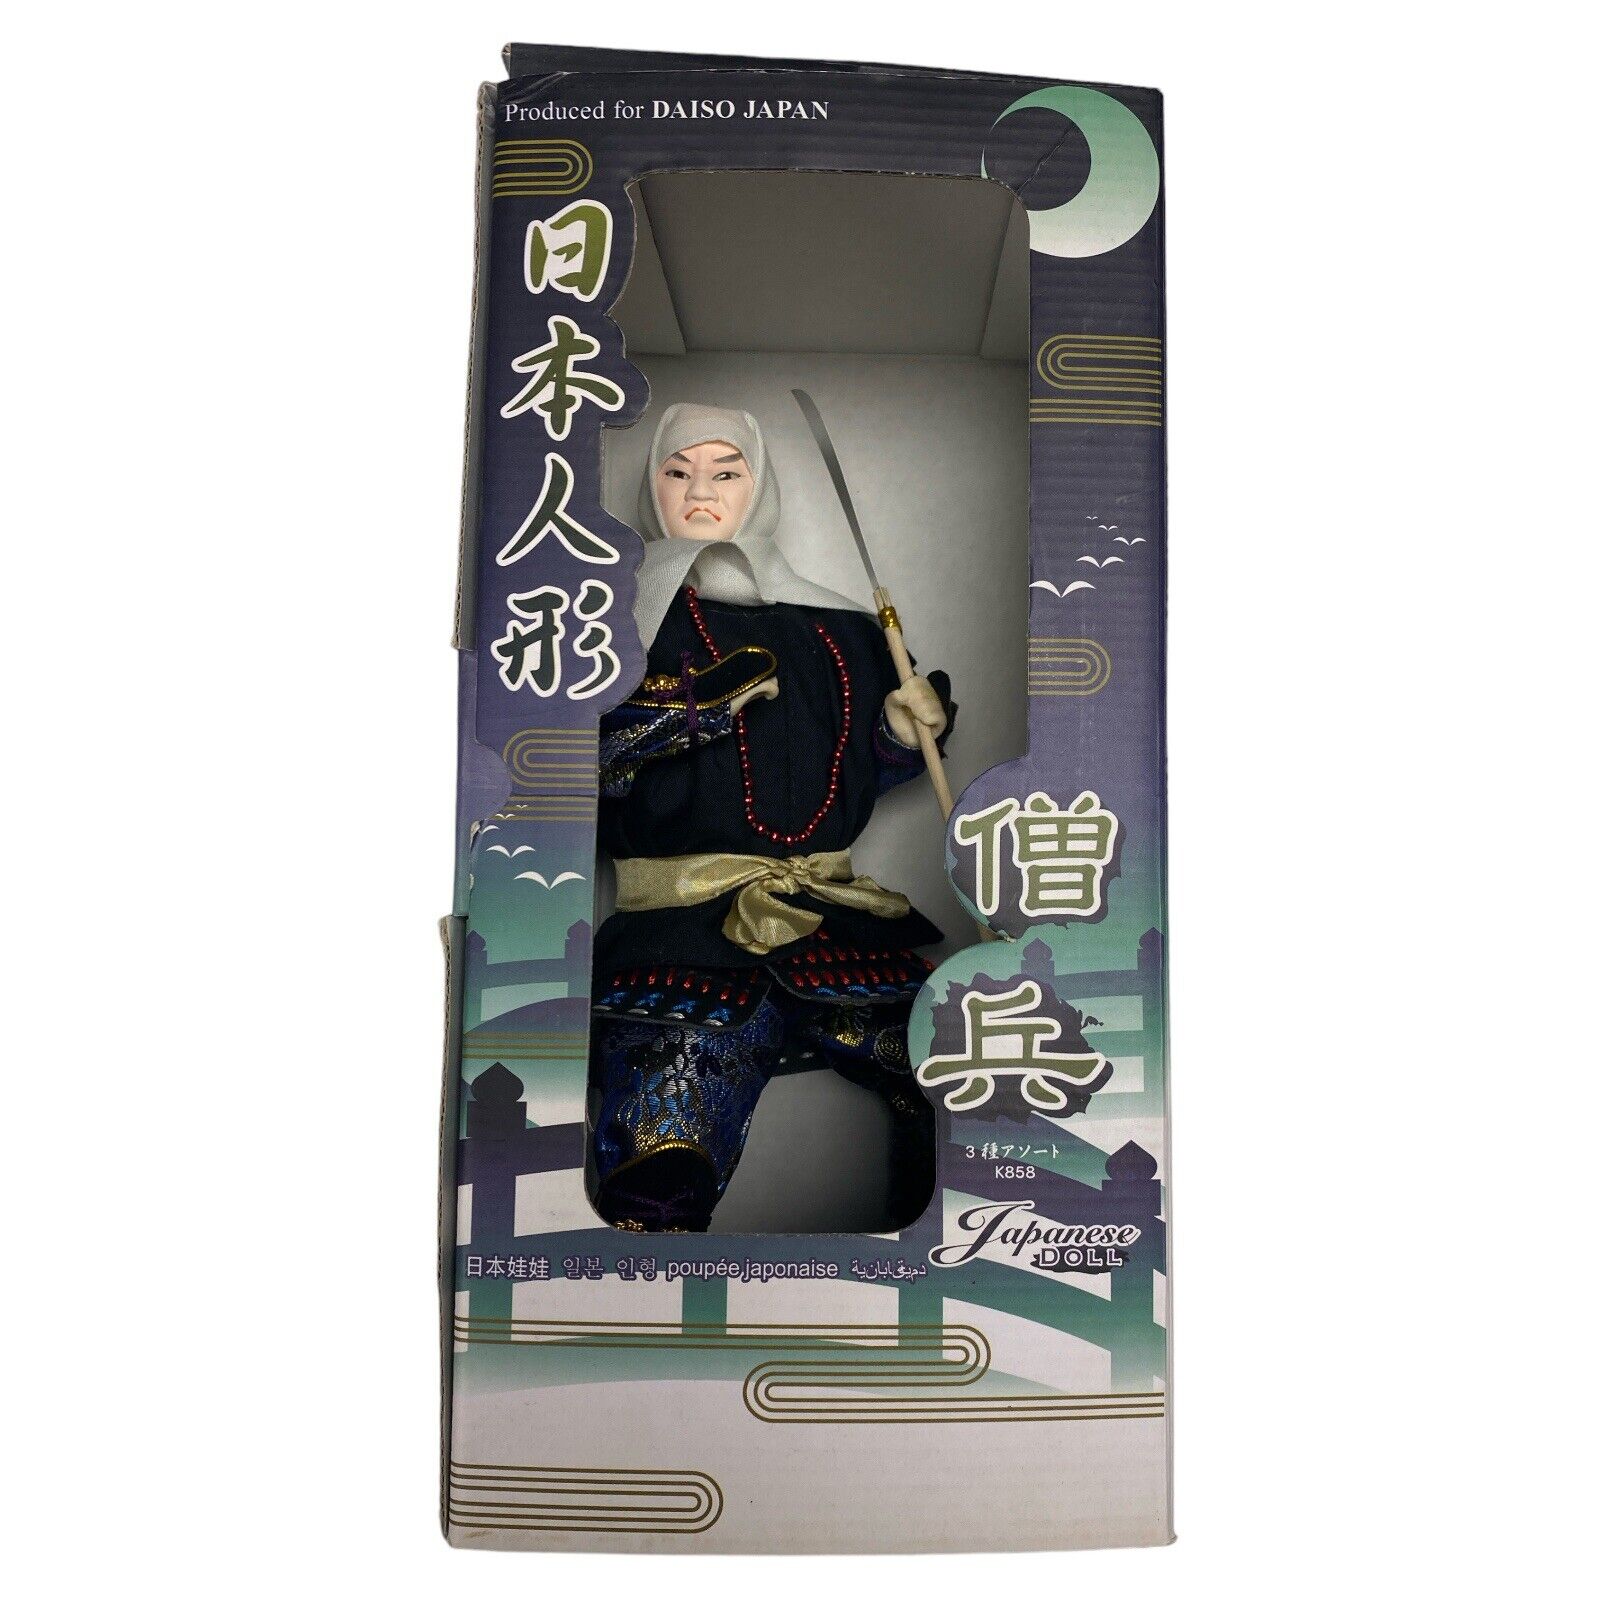 Daiso Japanese Doll Samurai Style New in Open Box Japan Quality